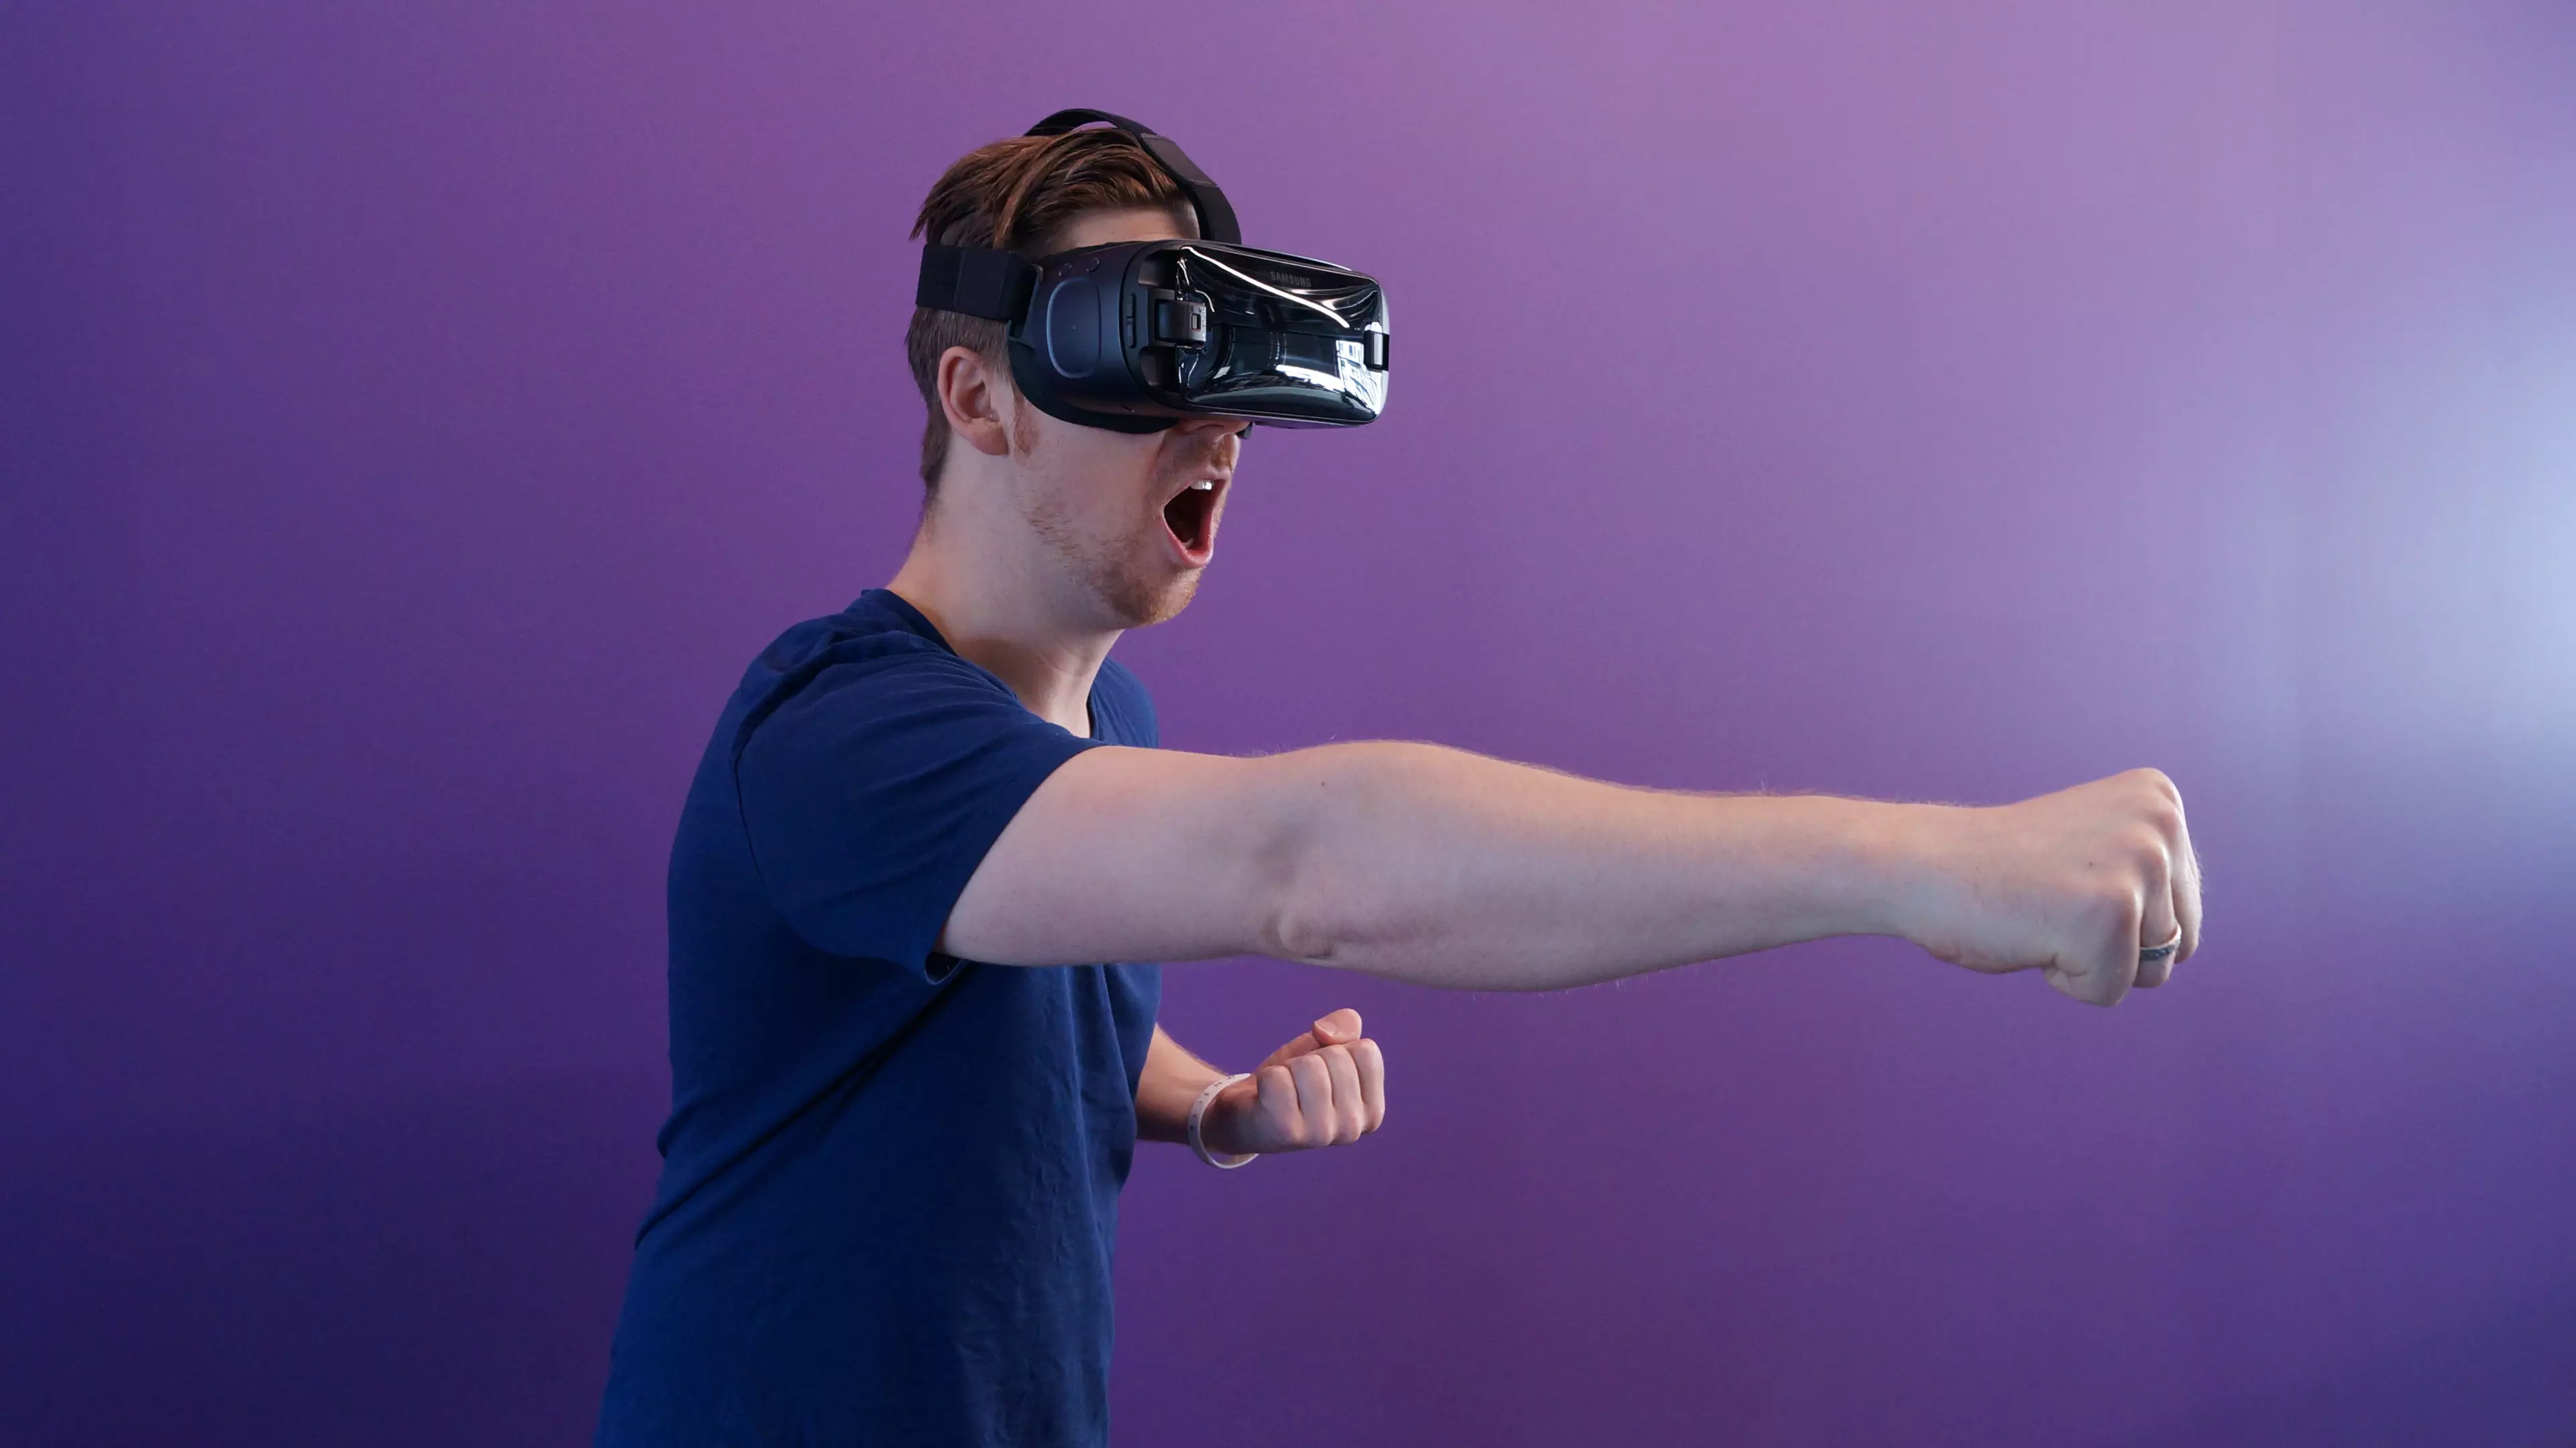 The virtual reality game is expected to be introduced next year (